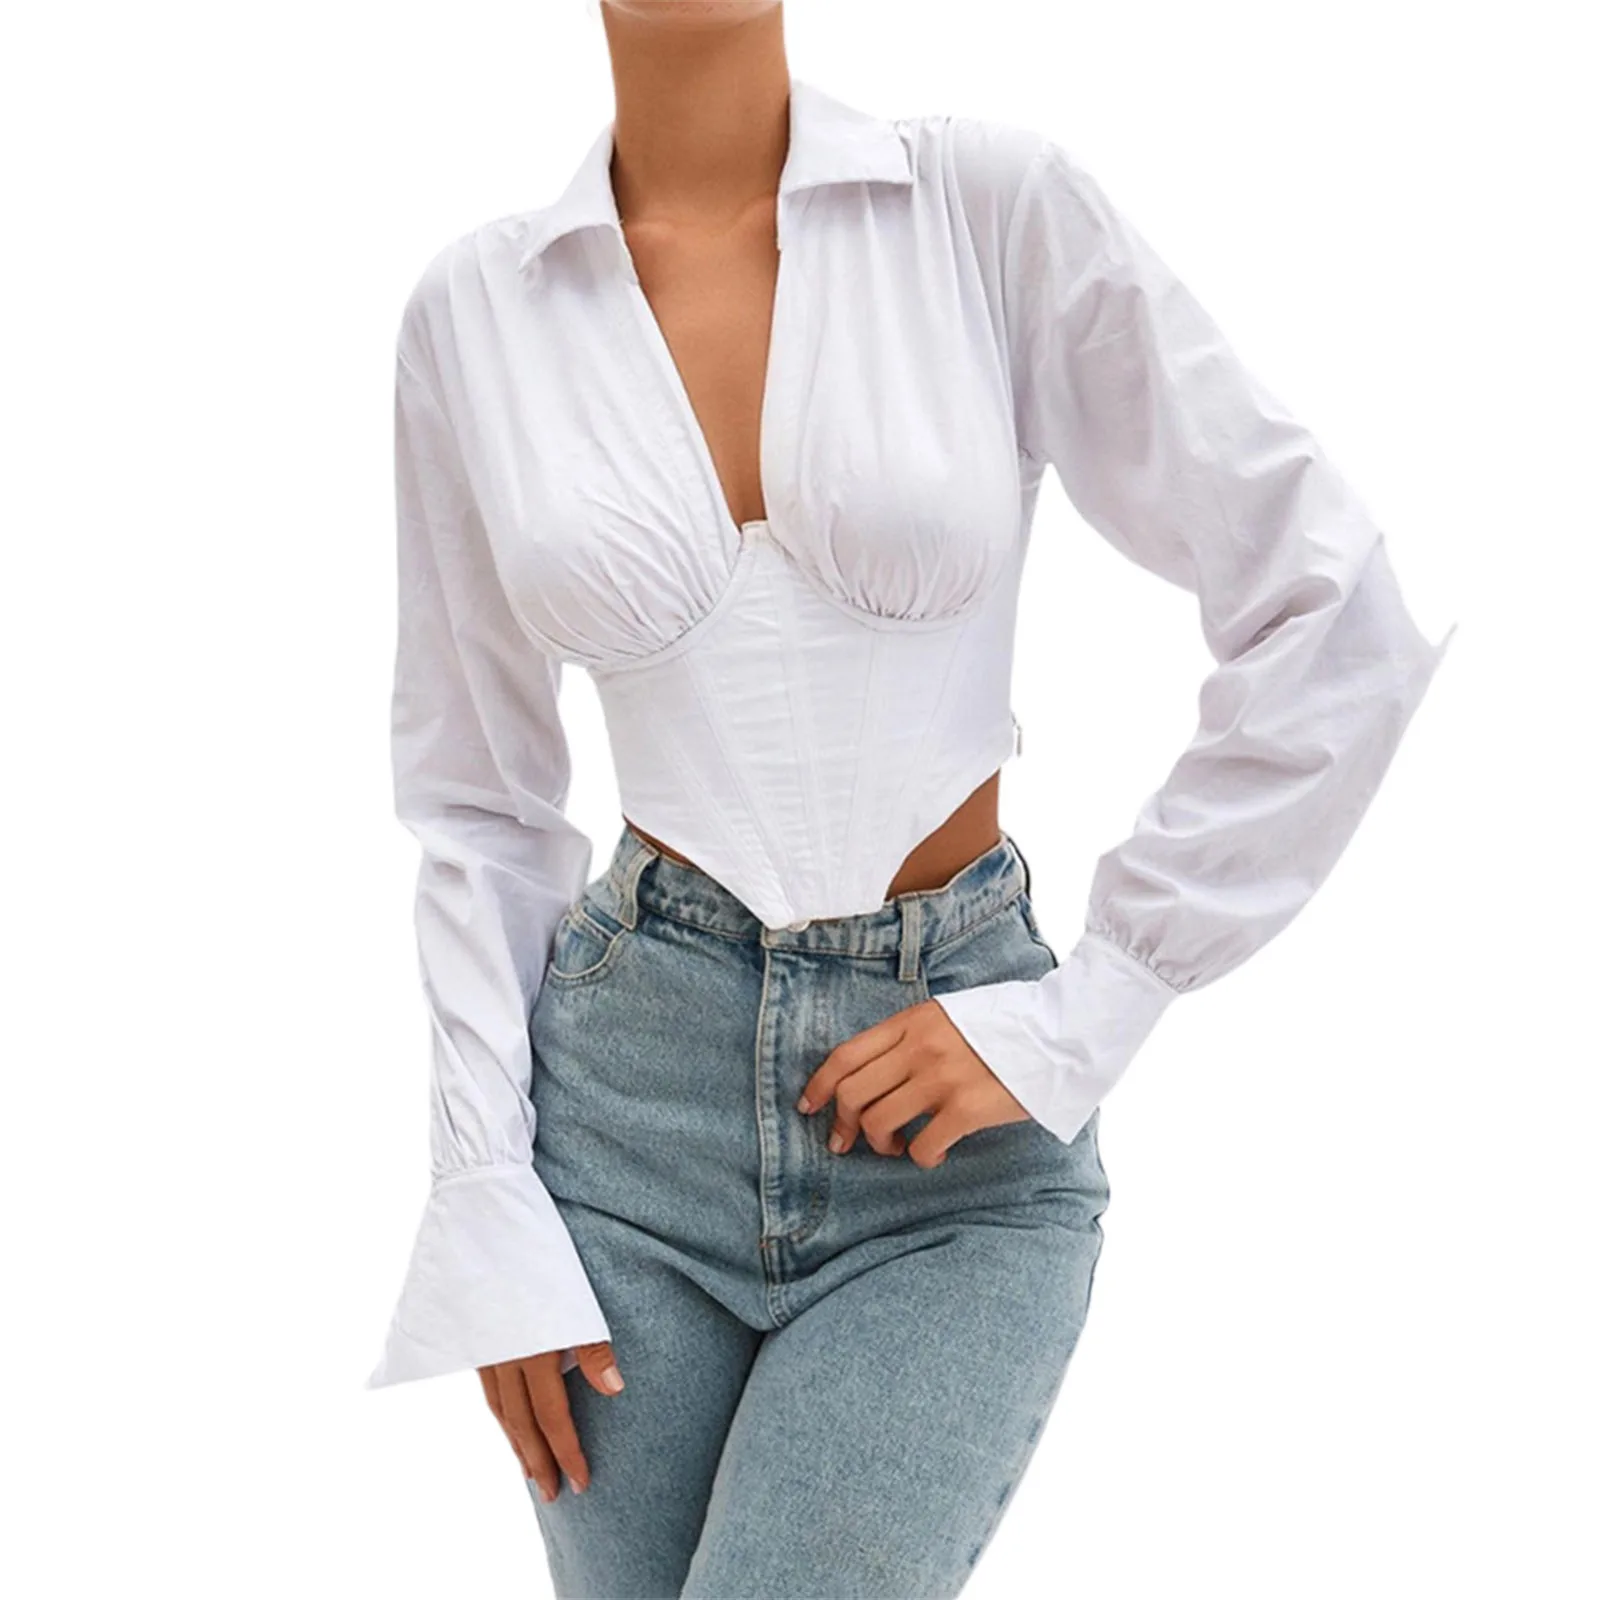 

Women Close-fitting Collared Tops White Solid Color Plunging Neckline Long Sleeve Blouse Beautiful Clothing